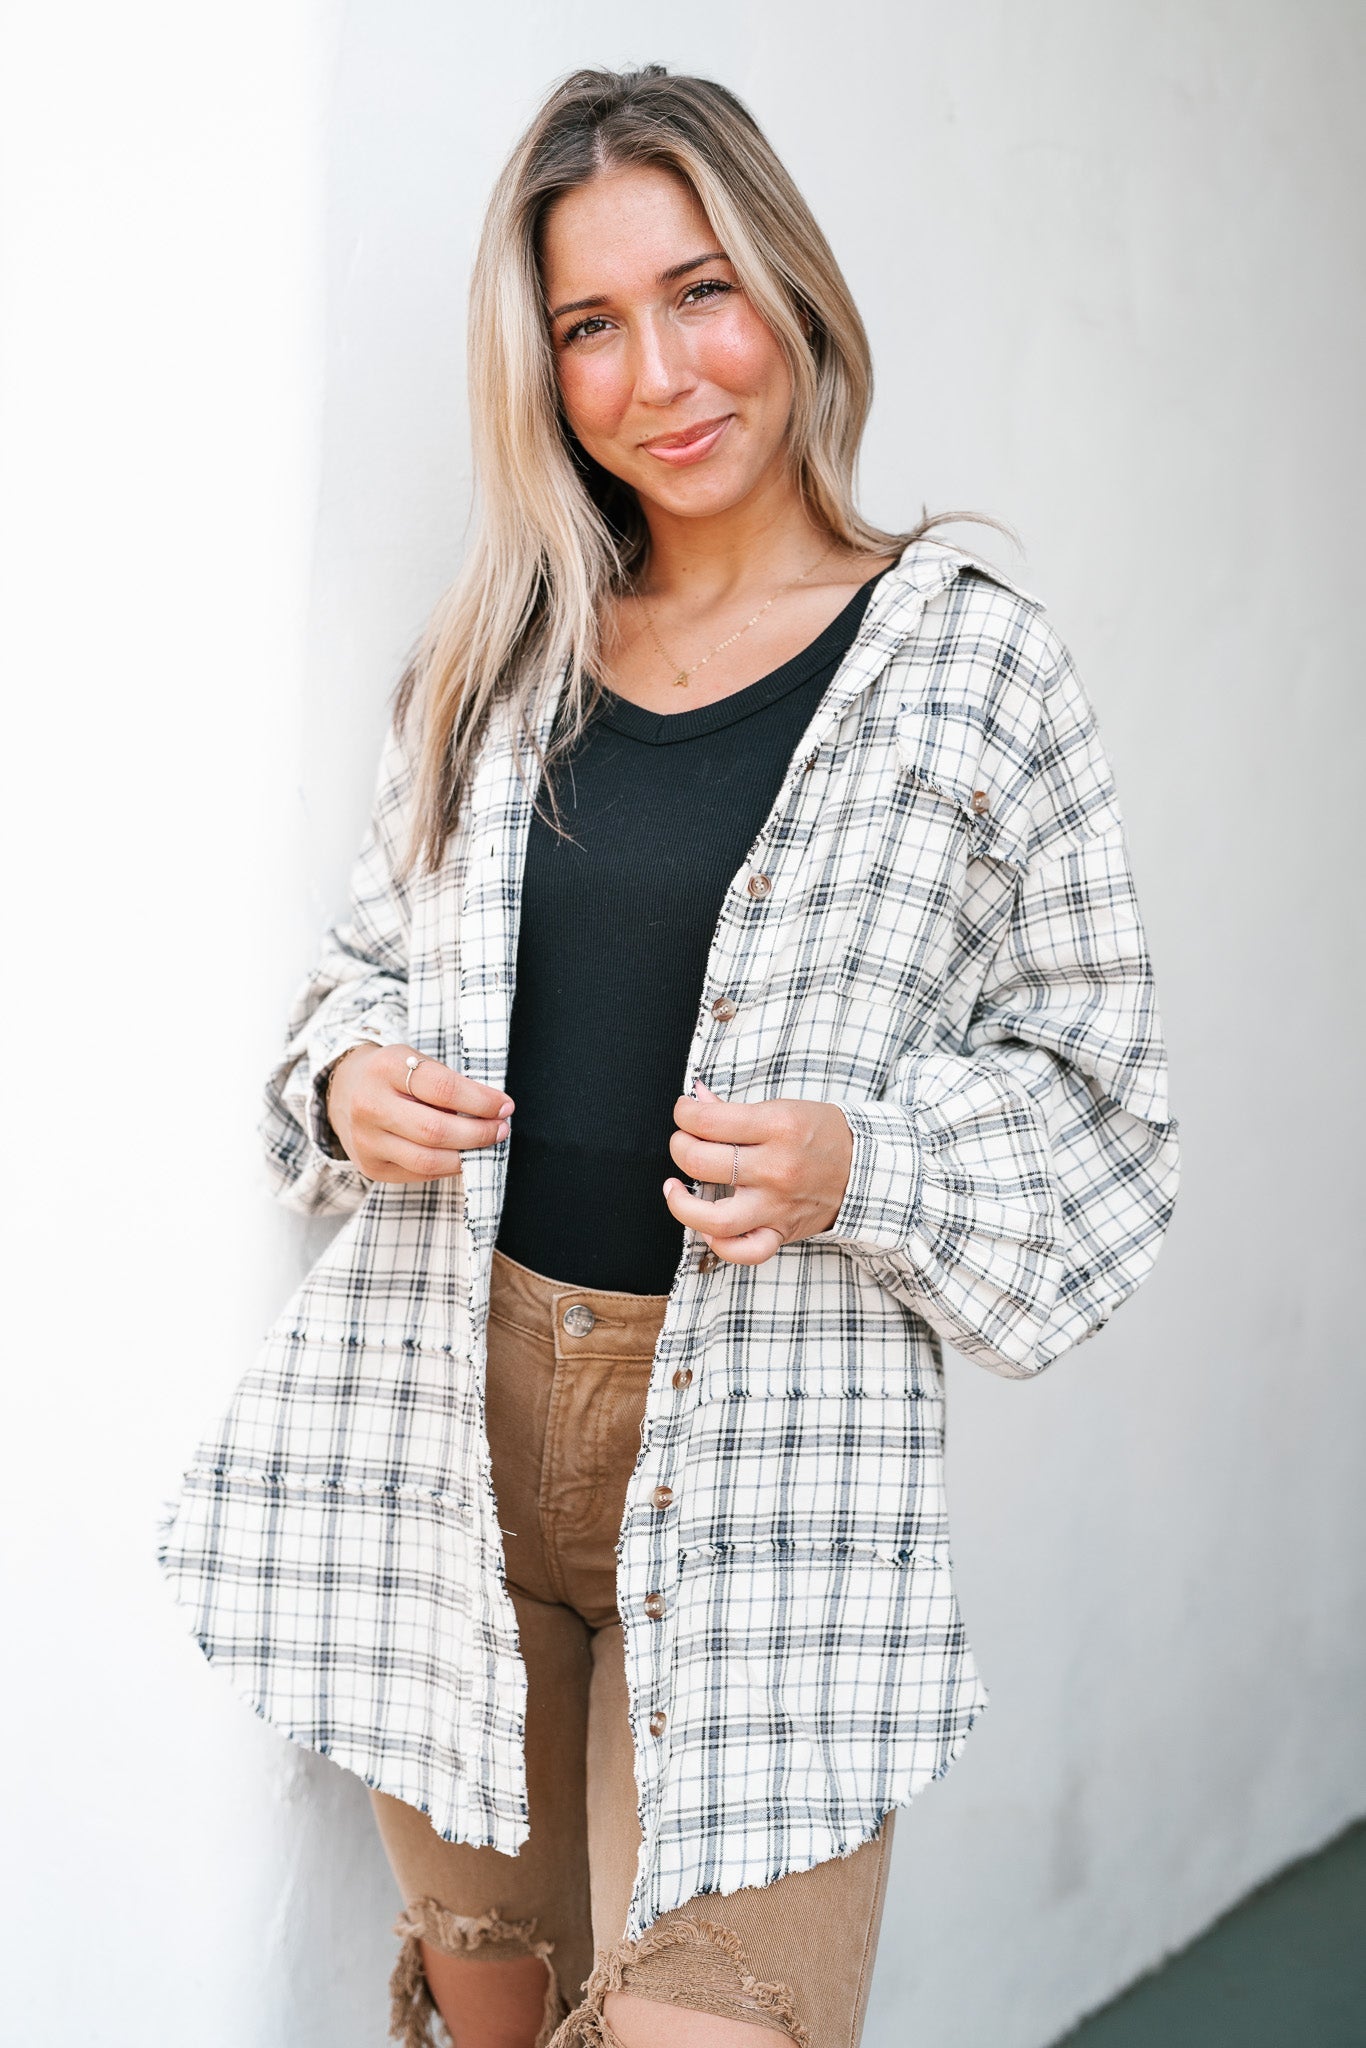 Channel the Flannel Top